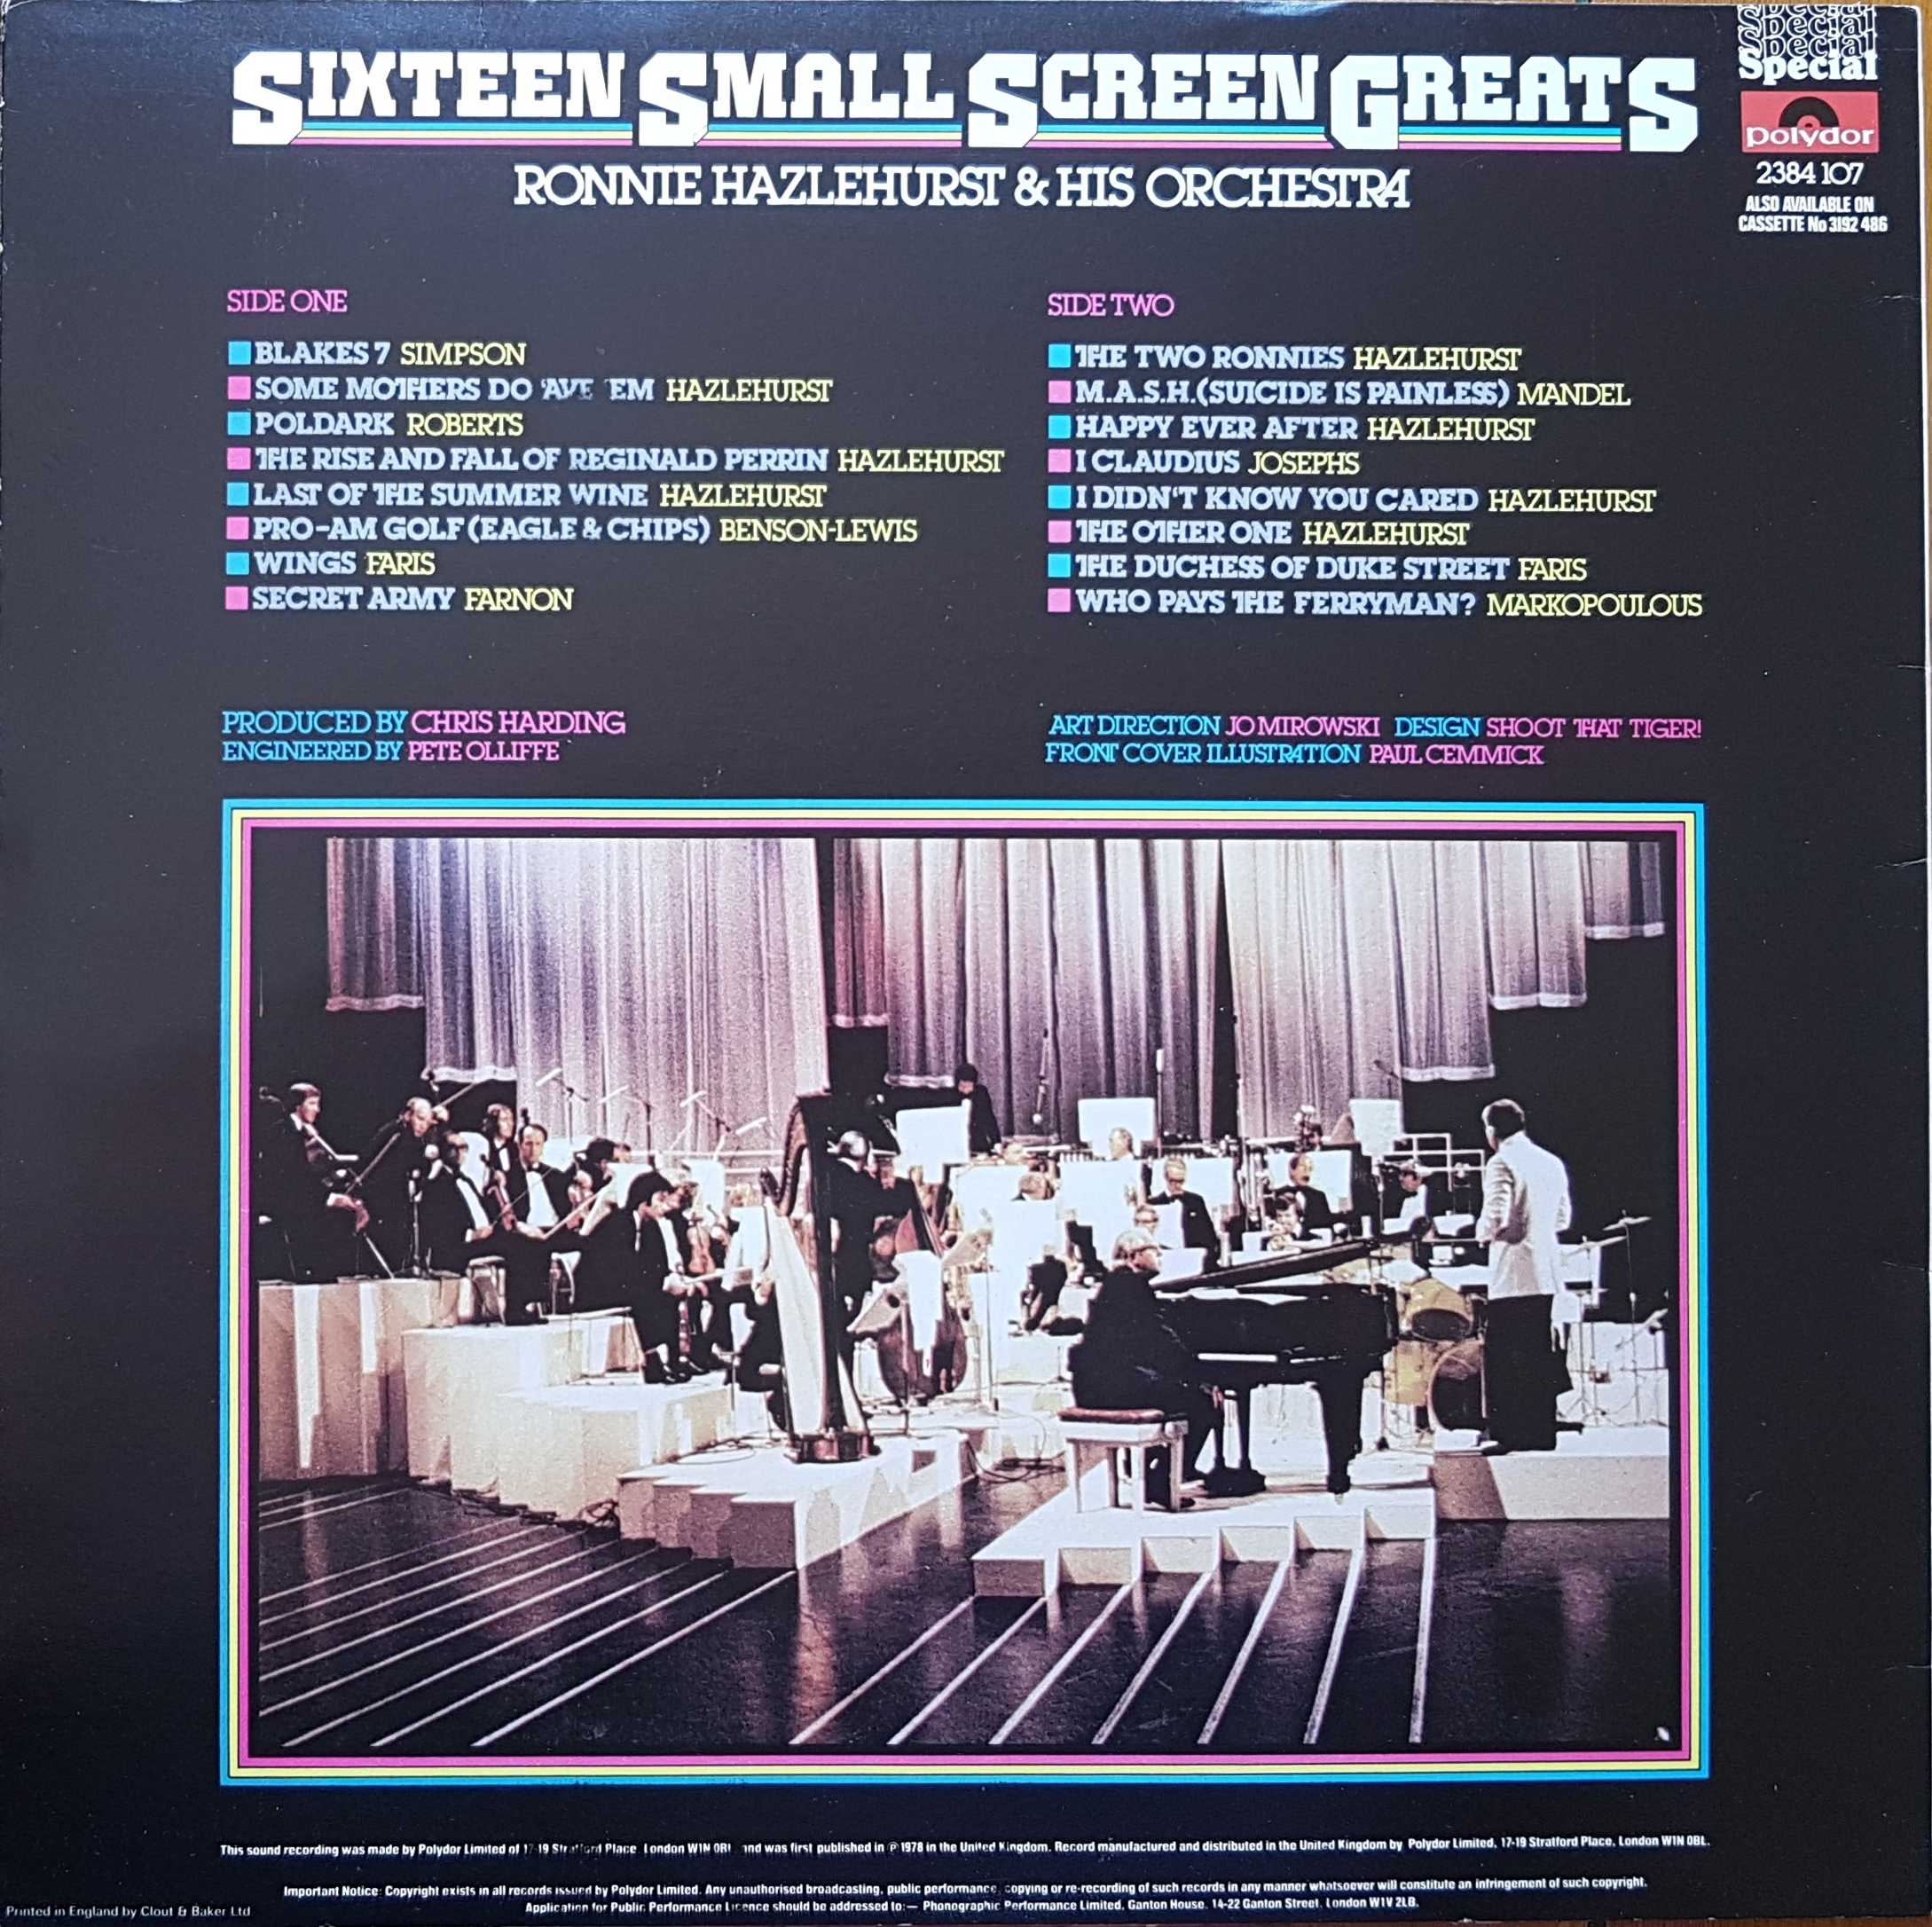 Picture of 2384 107 Sixteen small screen gems by artist Ronnie Hazlehurst & his orchestra from ITV, Channel 4 and Channel 5 library